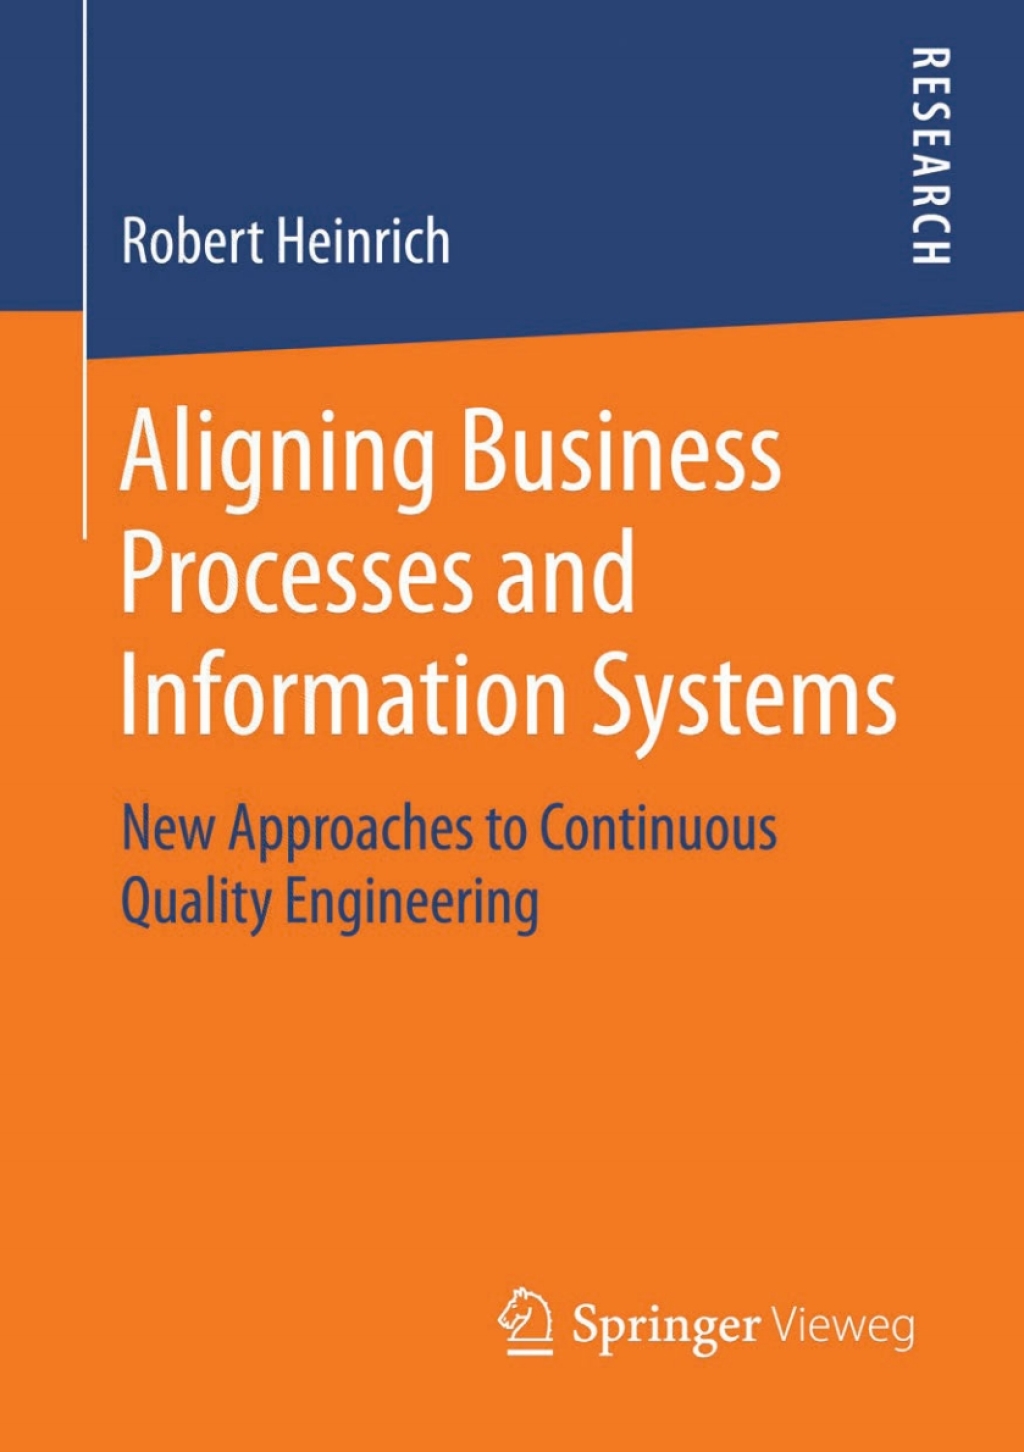 Aligning Business Processes and Information Systems (eBook Rental) - Robert Heinrich,